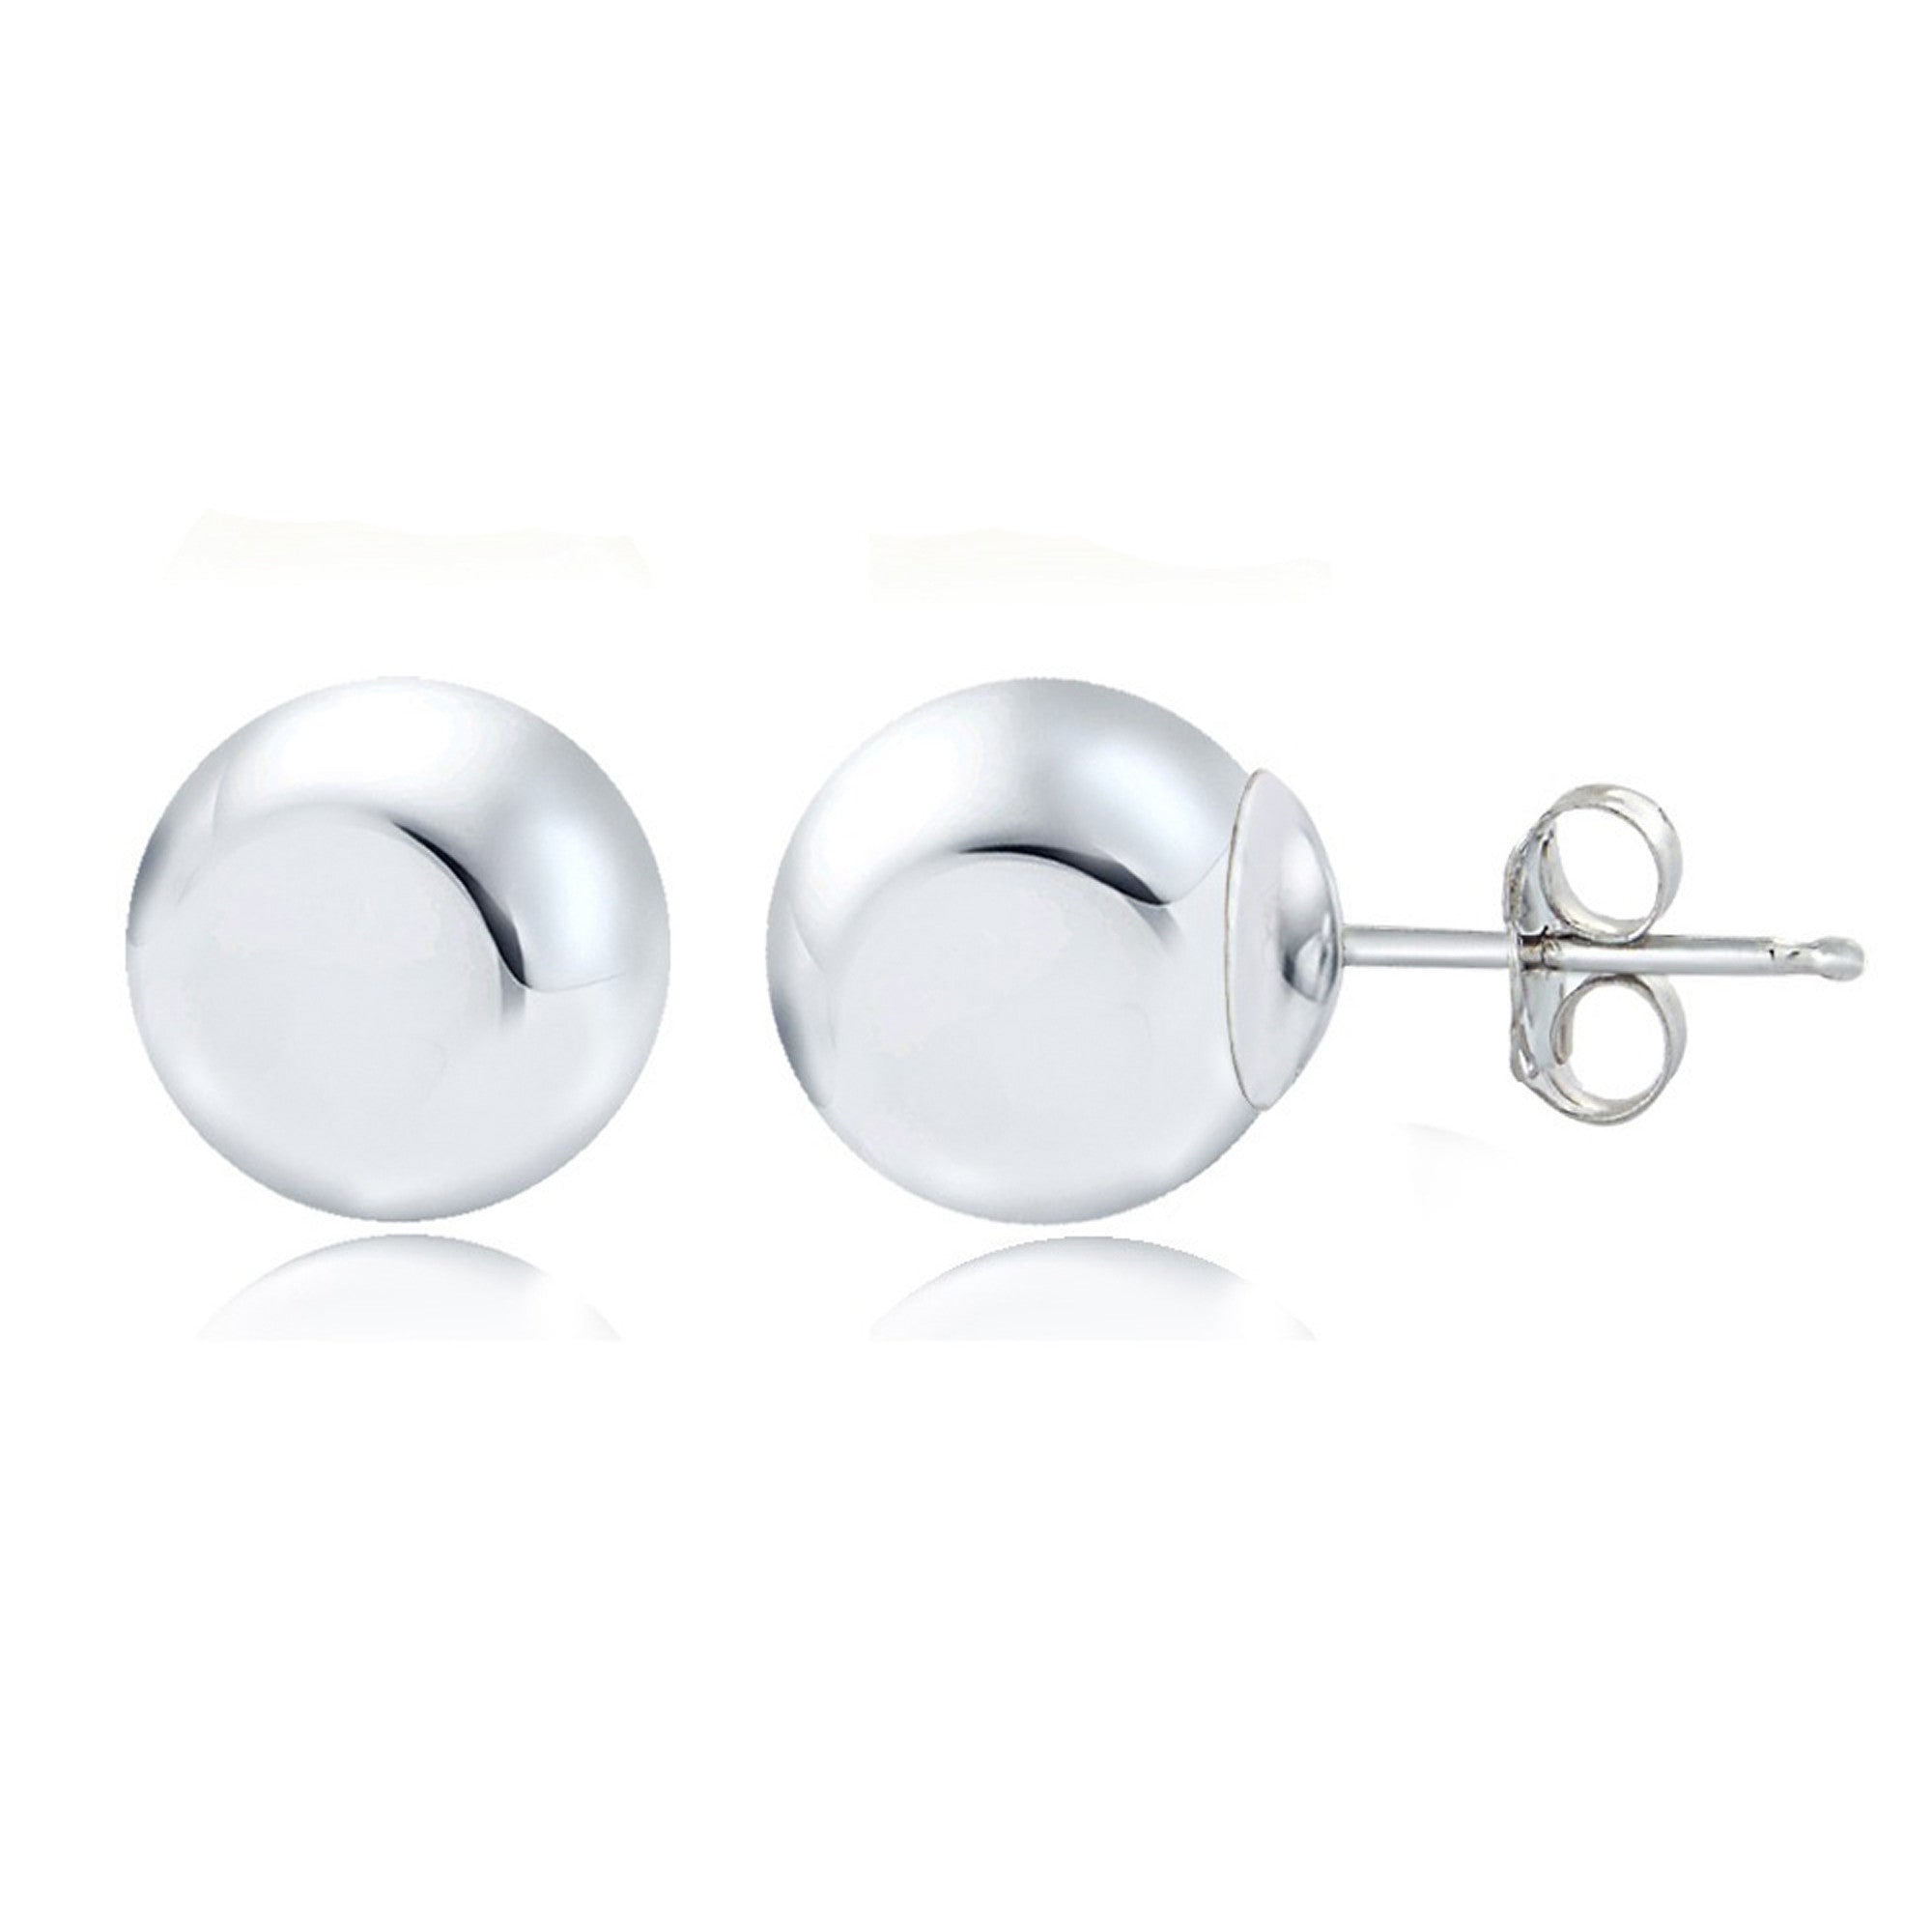 Round Ball Butterfly Clasp Stud Earrings - 5mm White Gold